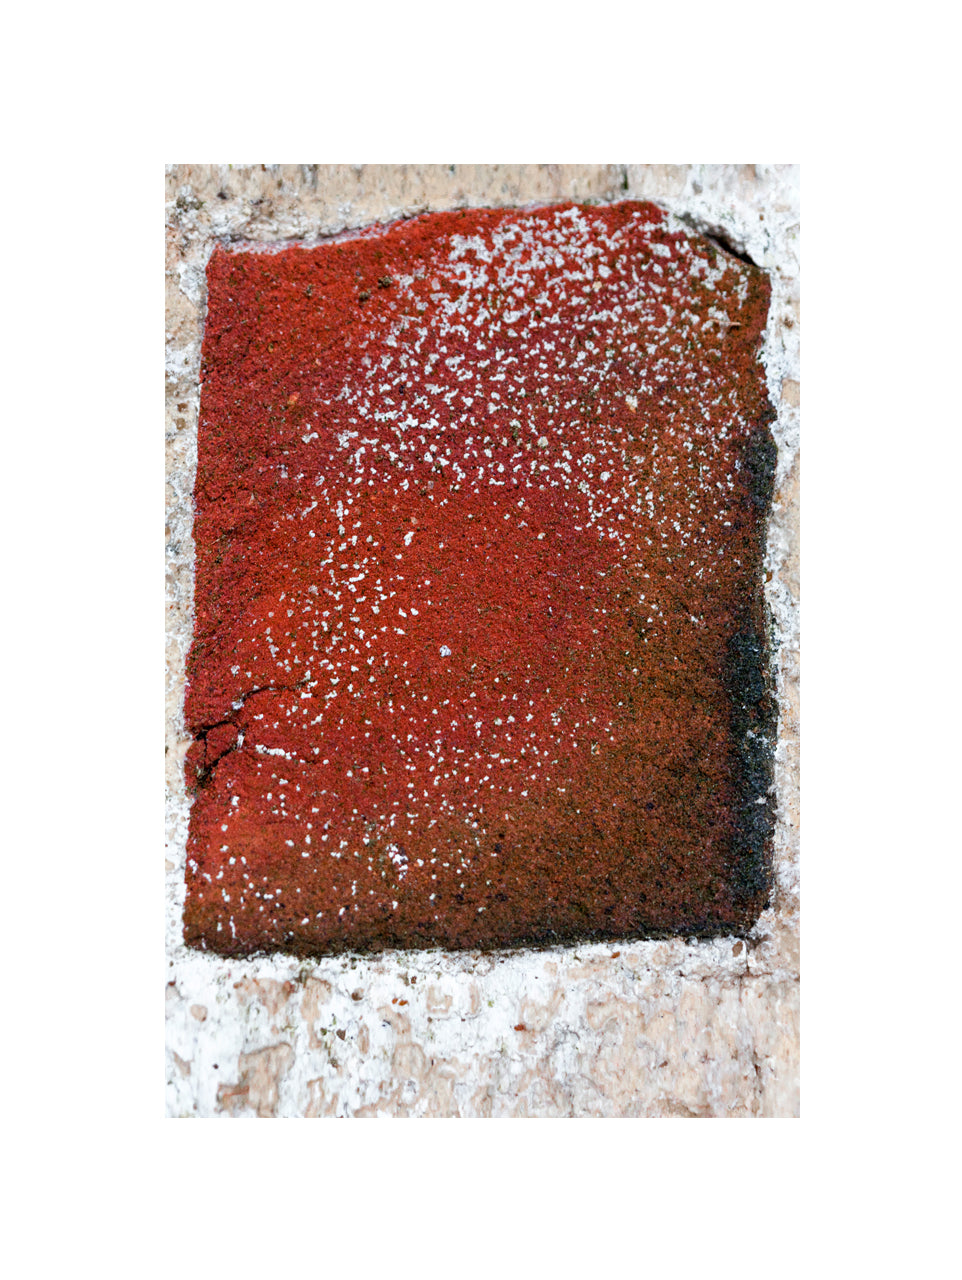 Patina and Decay, Red X